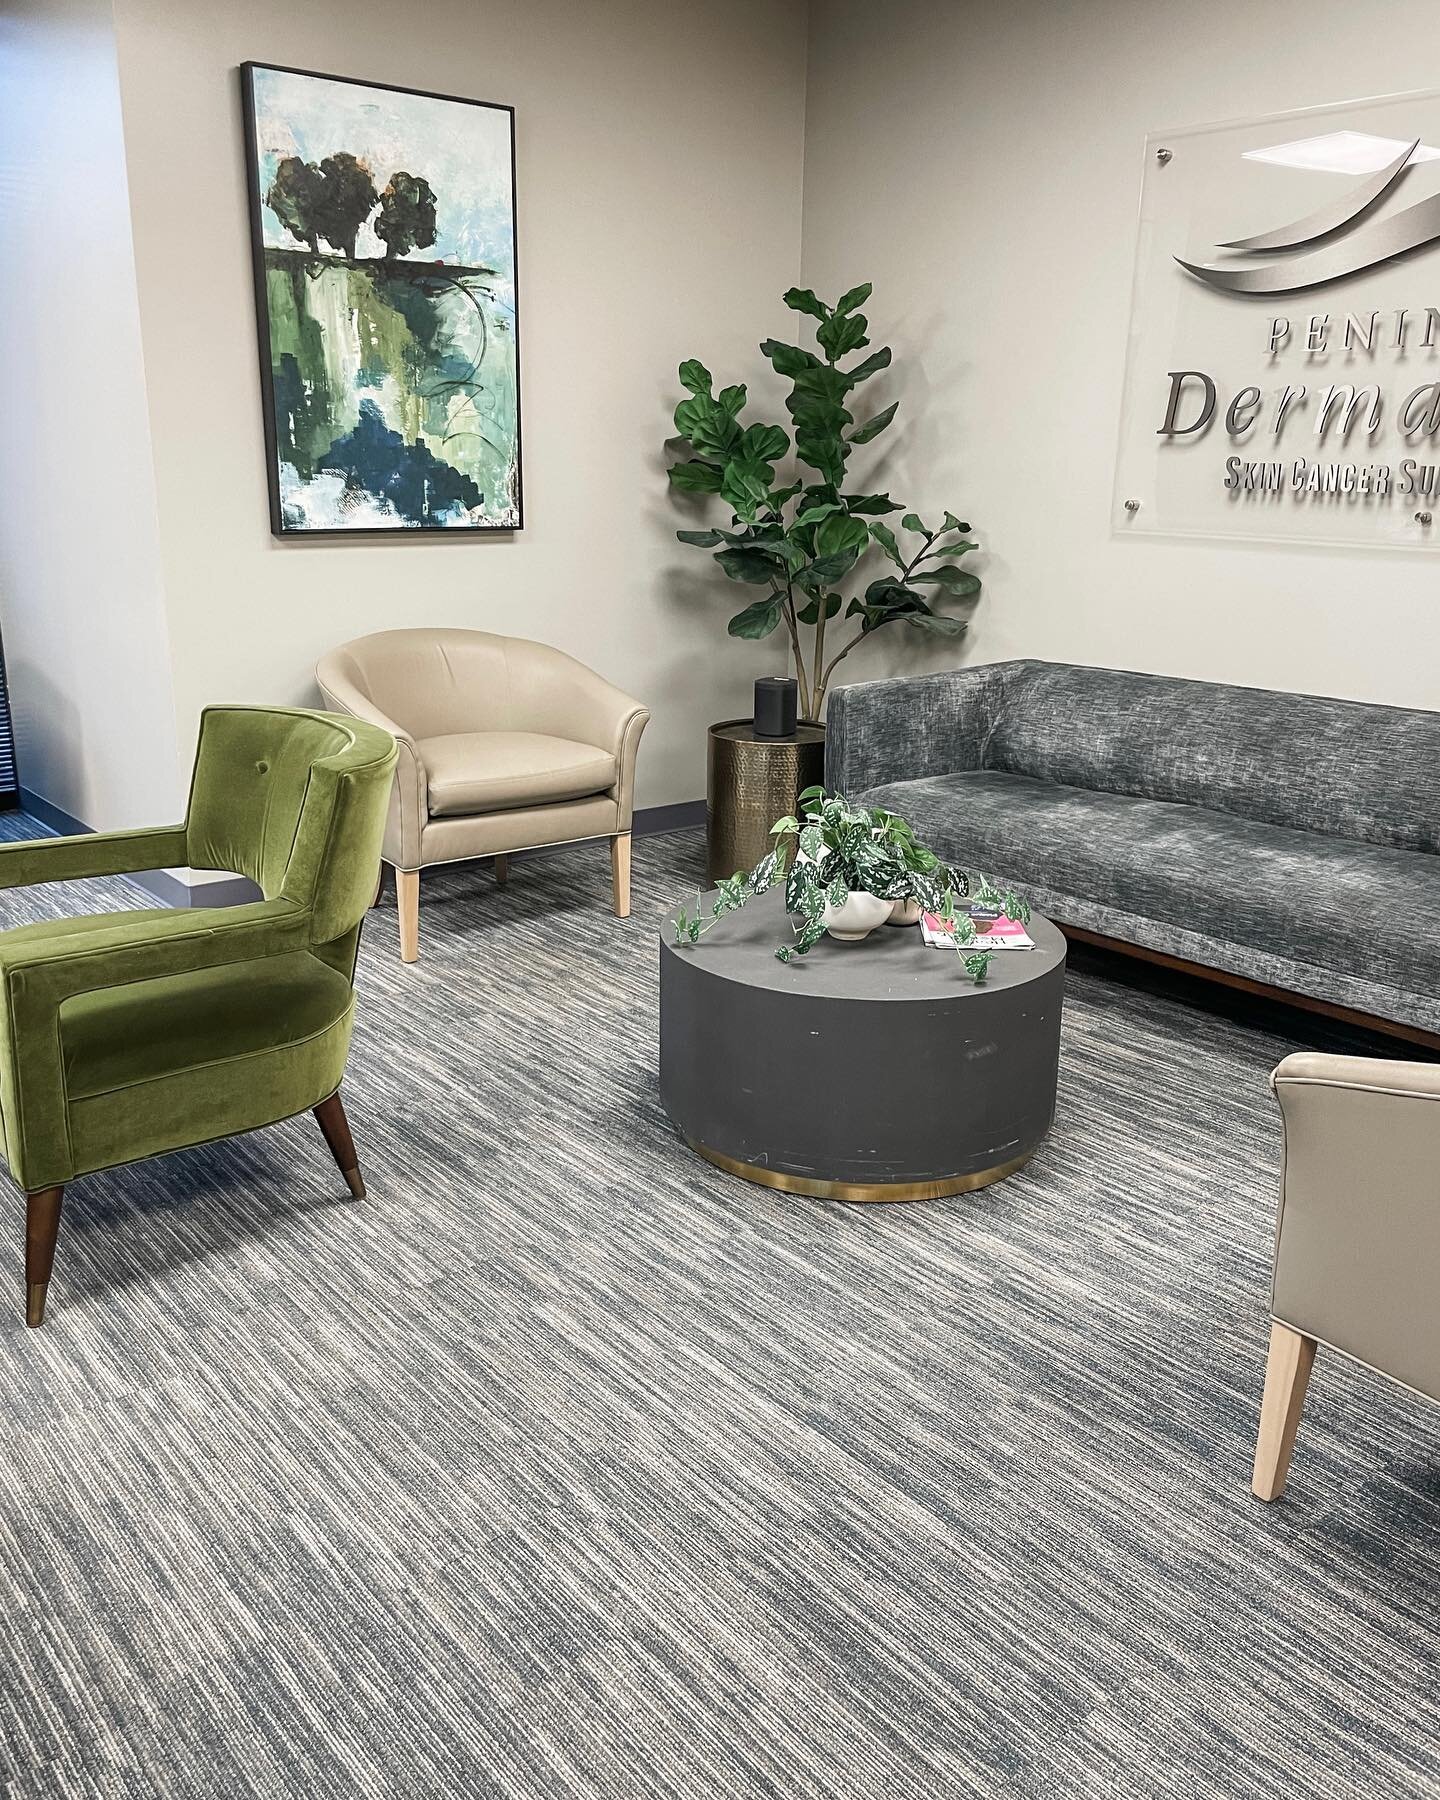 Loving all the new finishes and custom commercial-grade furniture pieces we've crafted for this dermatology office refresh. Everything works together to add style and sophistication. 

Design: @rachelkingdesign 
Client: @peninsuladermatologyva